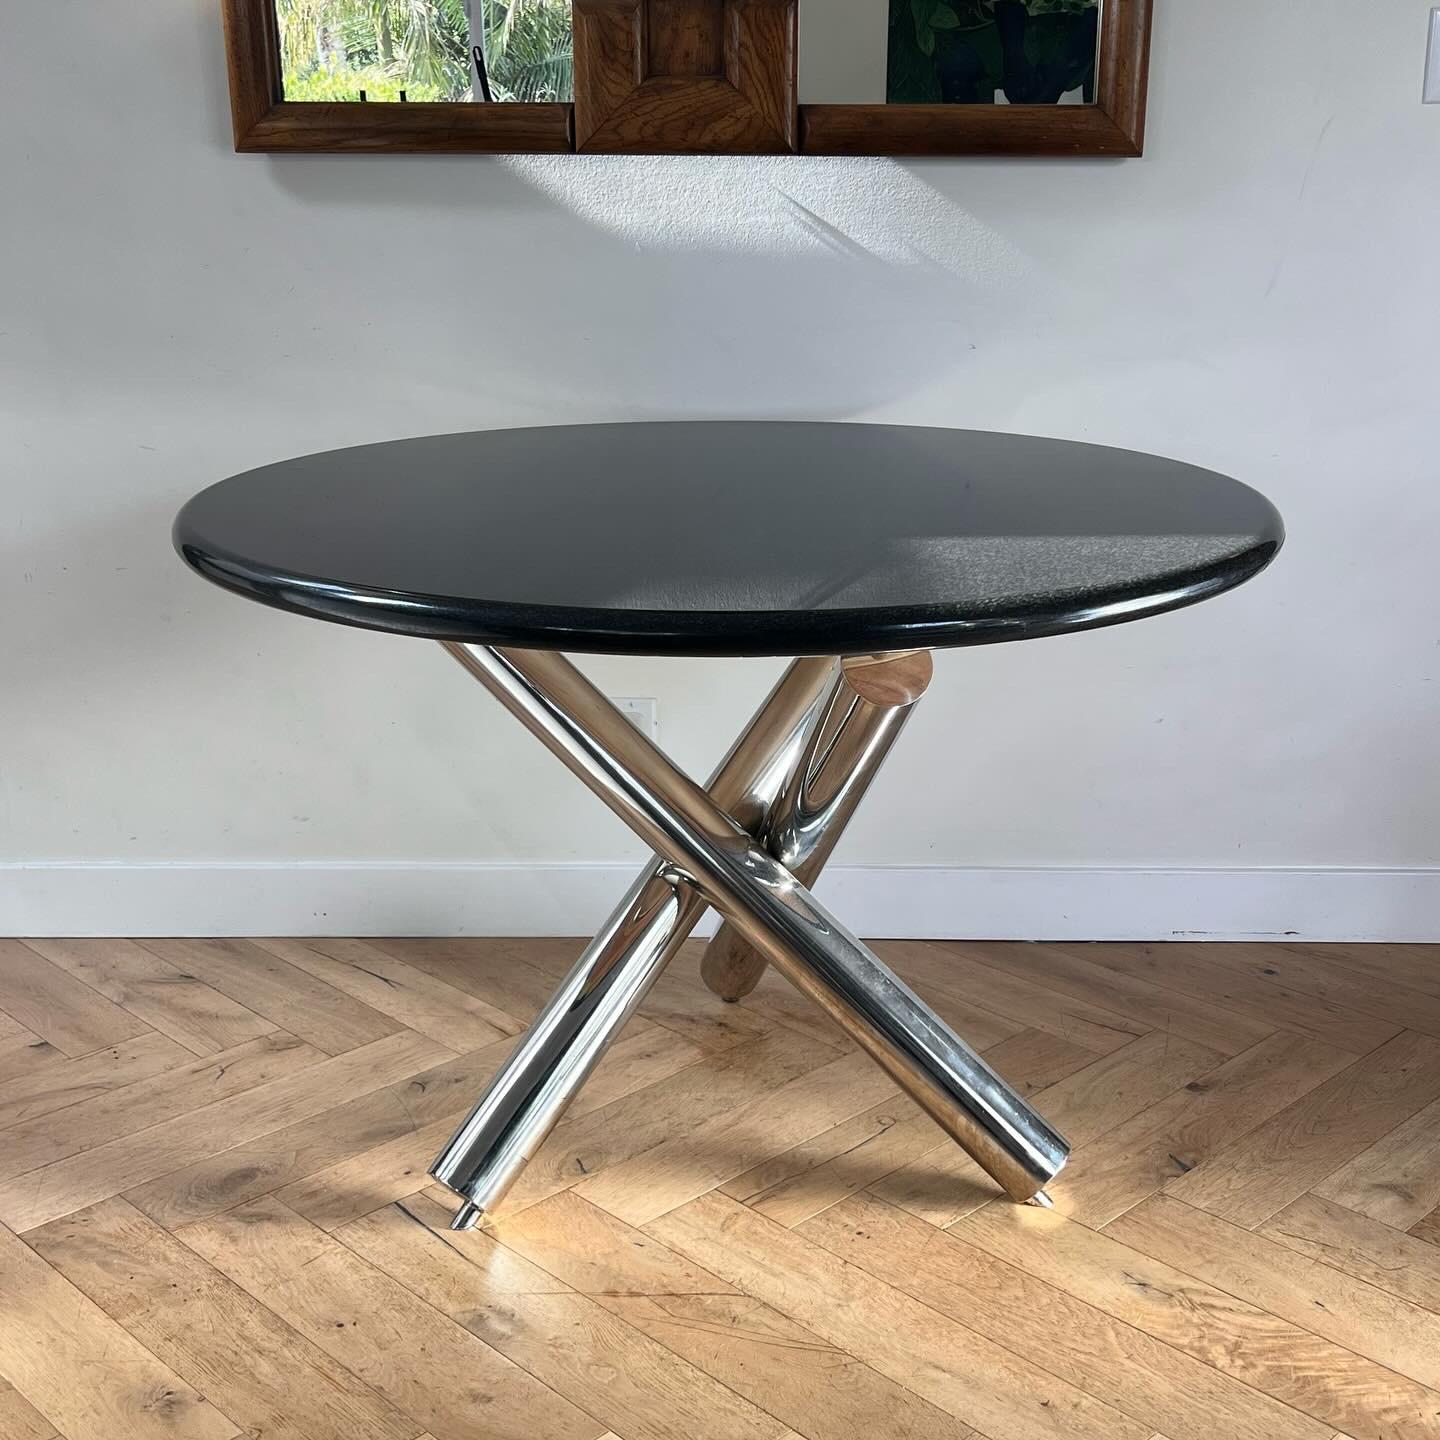 Postmodern chrome and granite circular dining table, late 20th century For Sale 4